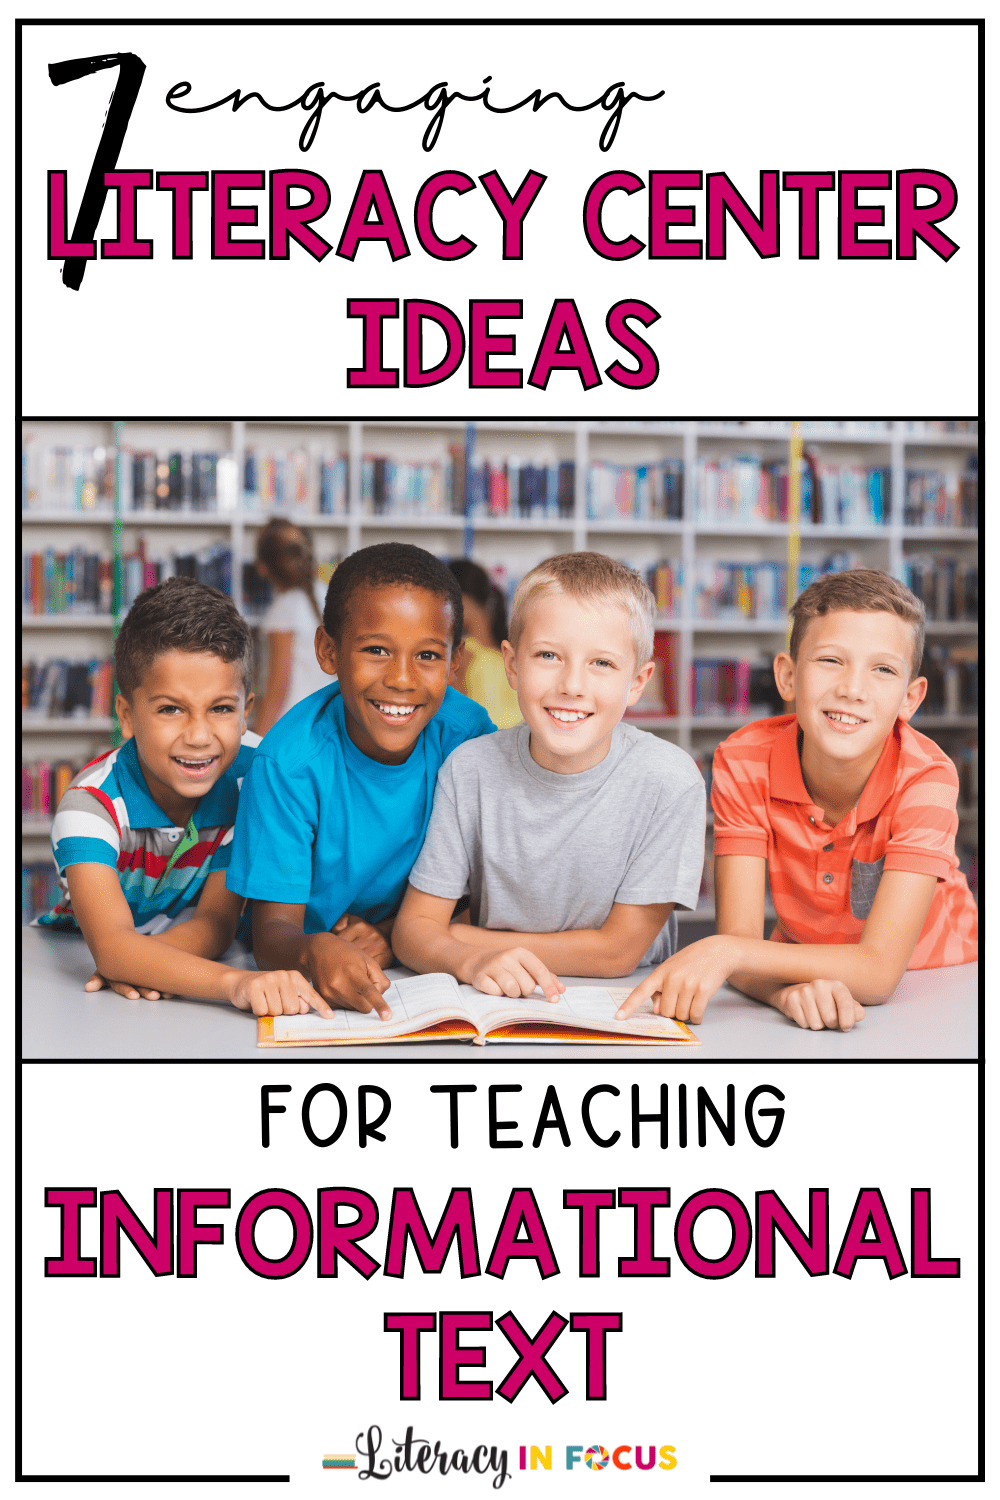 Literacy Center Ideas for Informational Text